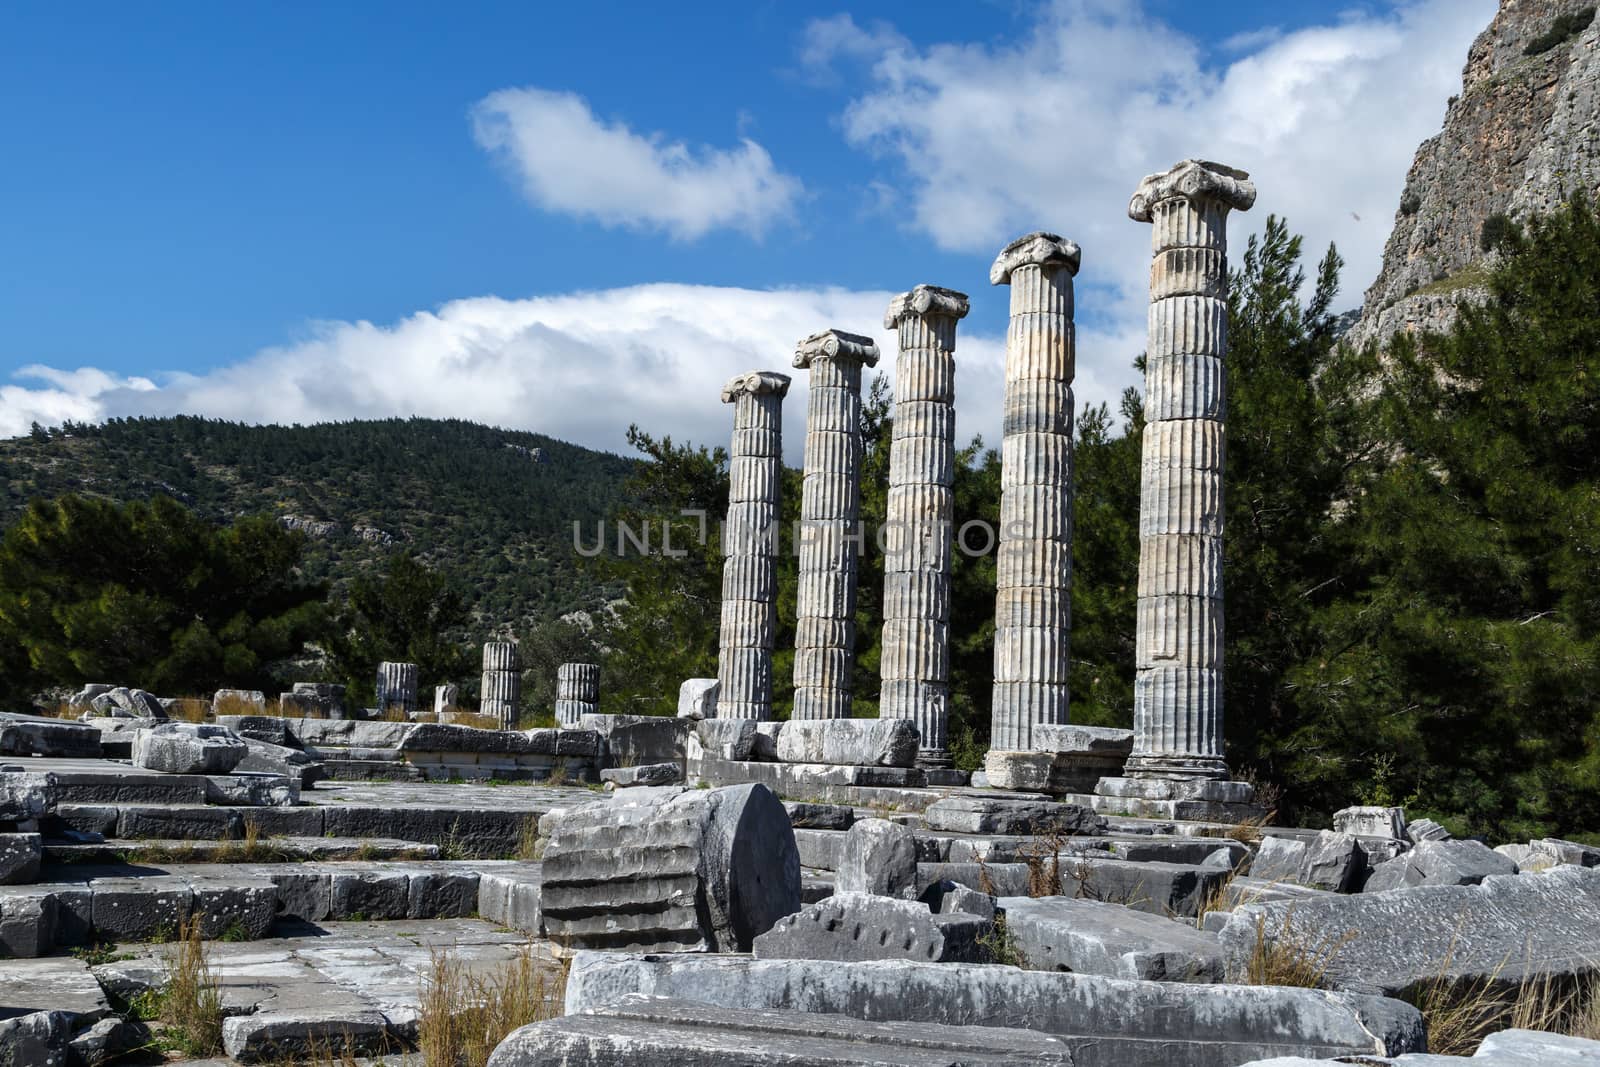 General temple view of Priene Ancient City in Aydın, Turkey, on bright blue sky background.